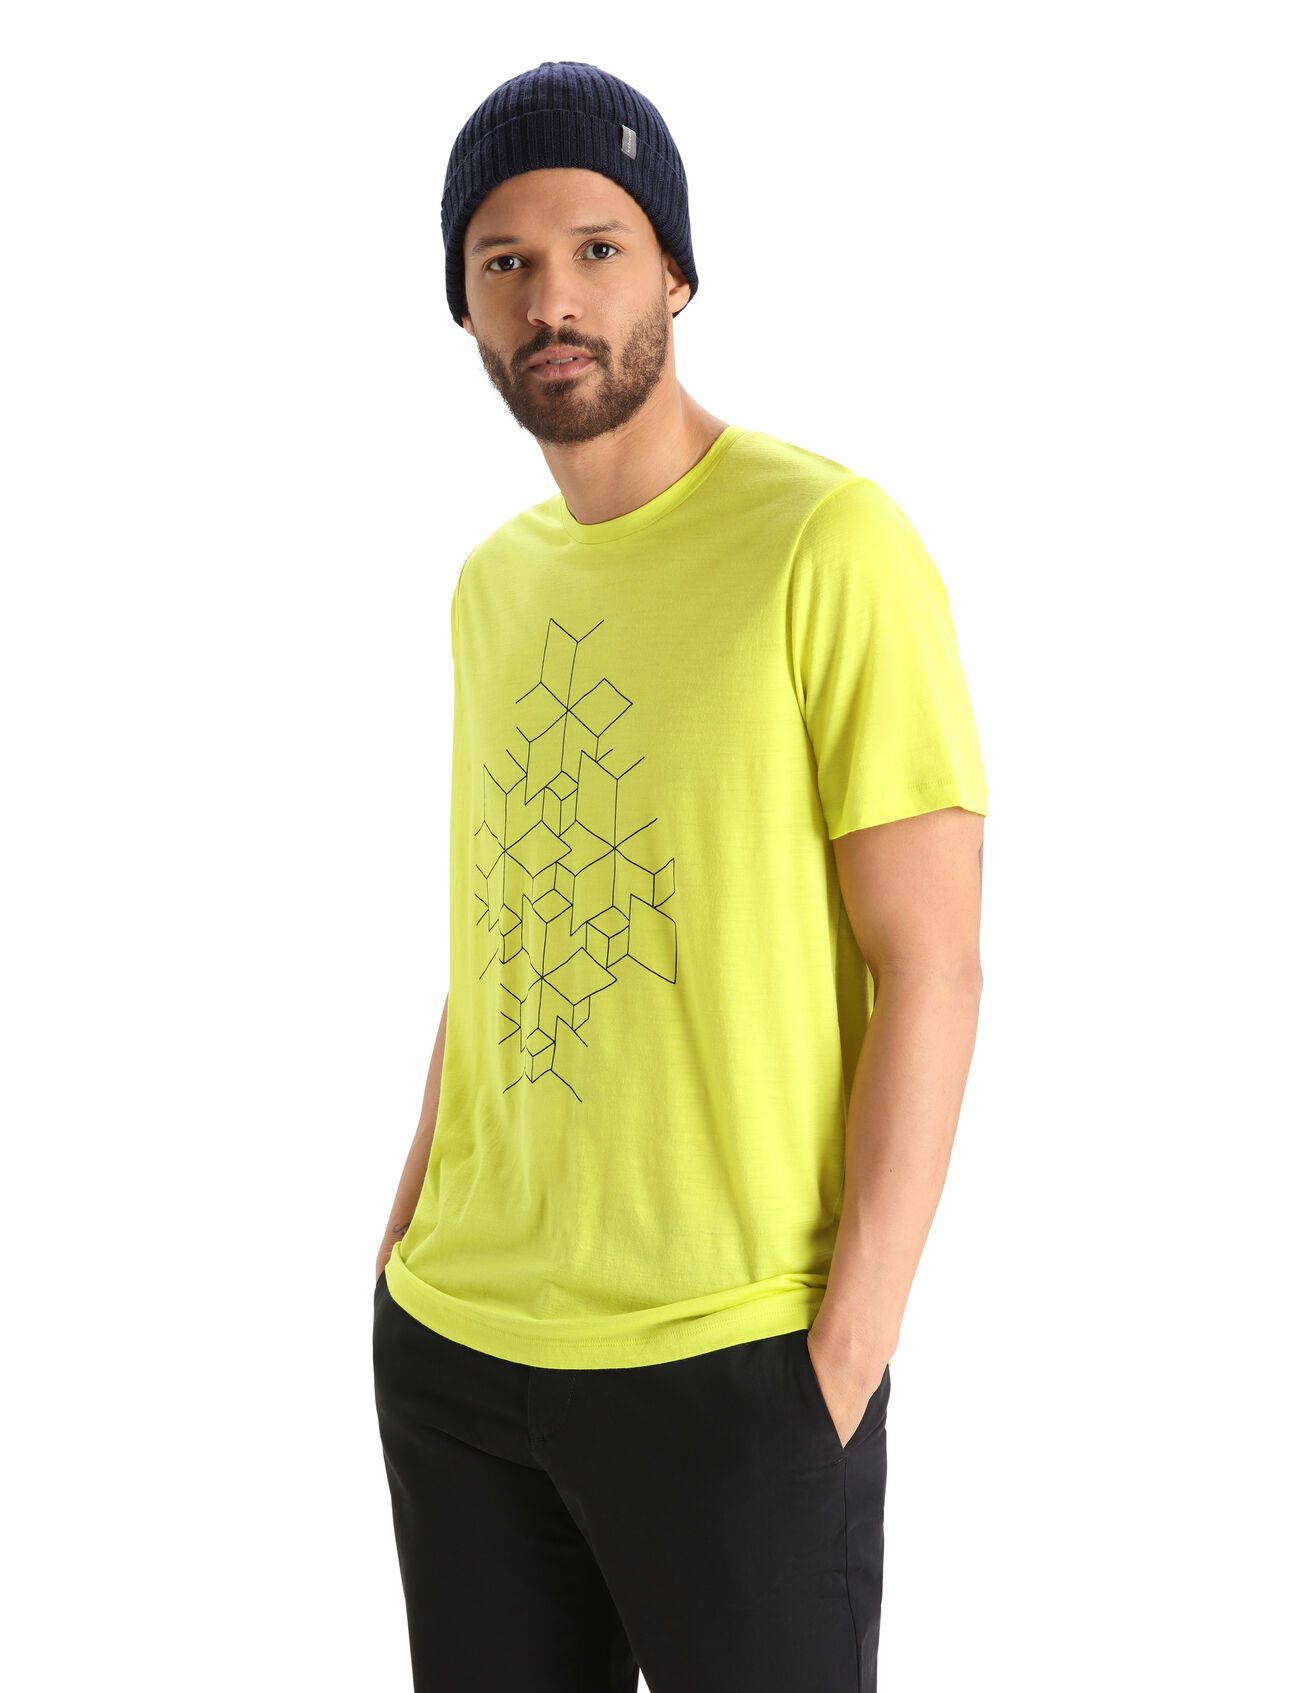 Mens Merino Tech Lite II Short Sleeve T-Shirt Snowflake Our versatile tech tee that provides comfort, breathability and natural odor-resistance for any adventure you can think of, the Tech Lite II Short Sleeve Tee Snowflake features 100% merino for all-natural performance. The original artwork features a hand-drawn illustration inspired by the geometry of a snowflake structure.